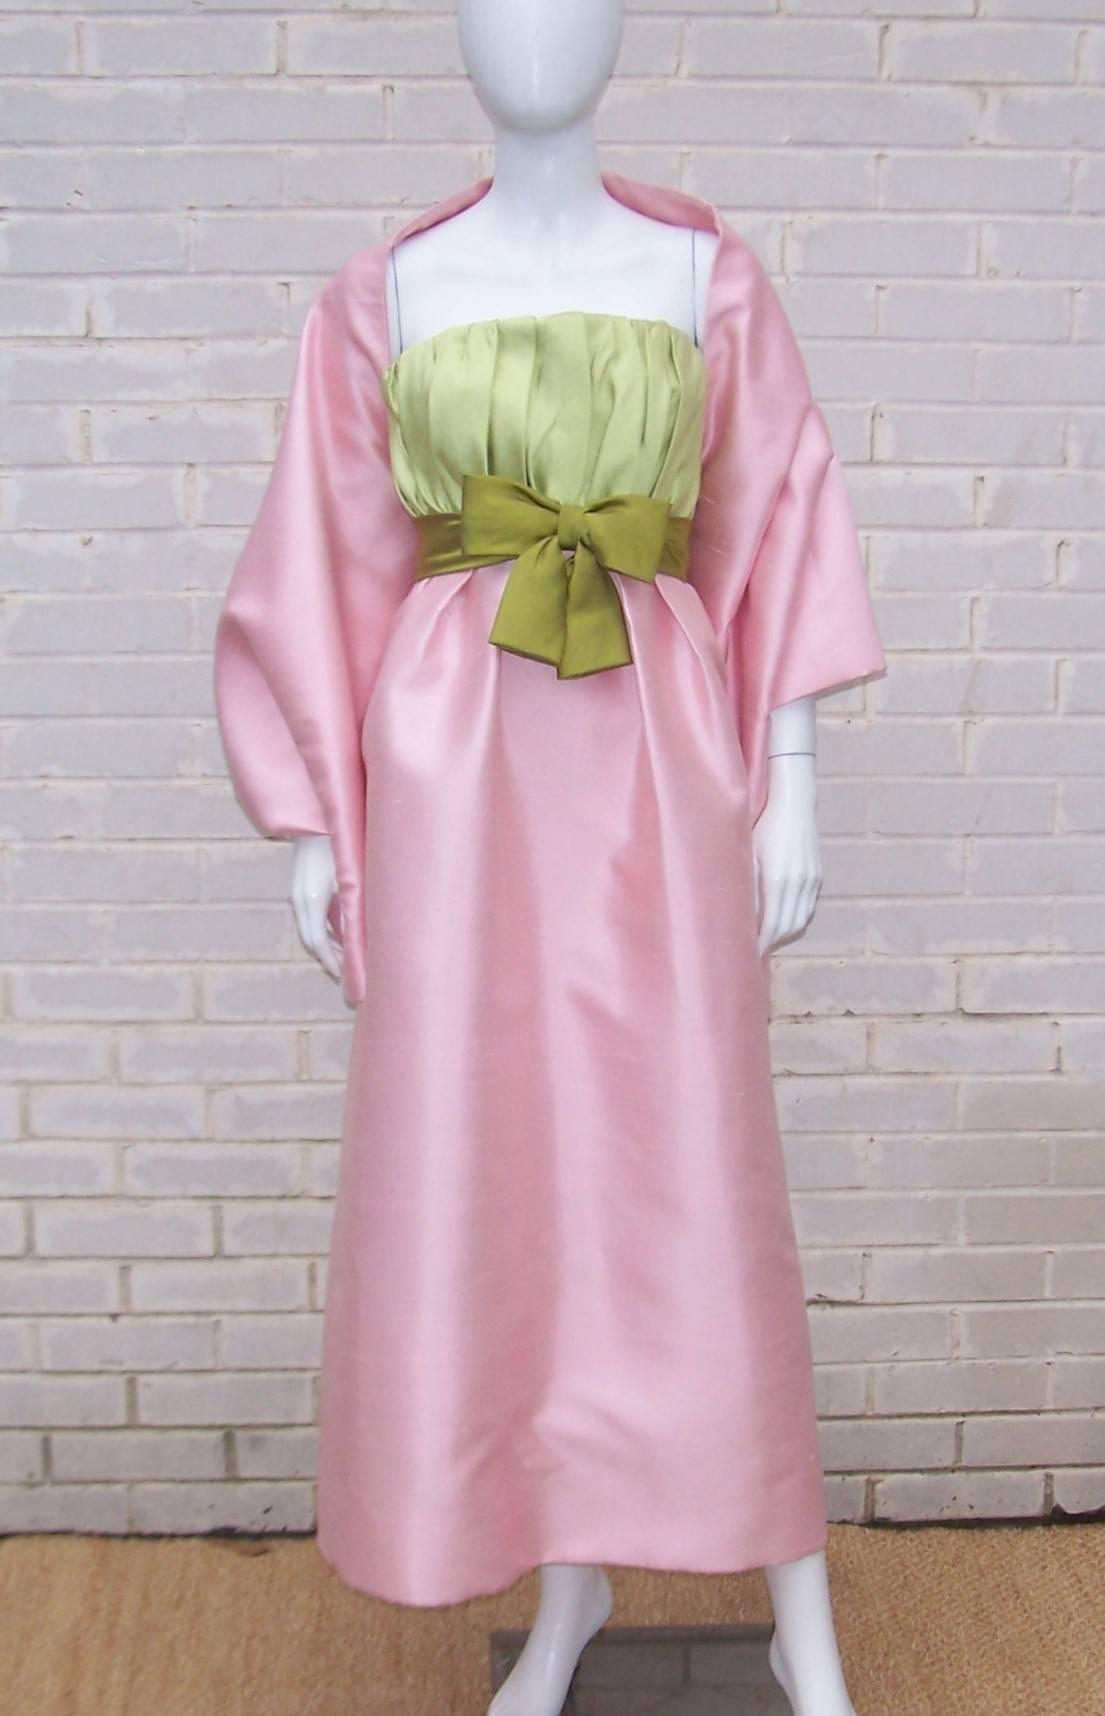 This pink and green creation by Bob Bugnand for Sam Friedlander is the picture of a springtime garden.  Mr. Bugnand was an American designer who worked for many years in Paris with Jacques Heim, Robert Piguet and under his own label.  Many of his